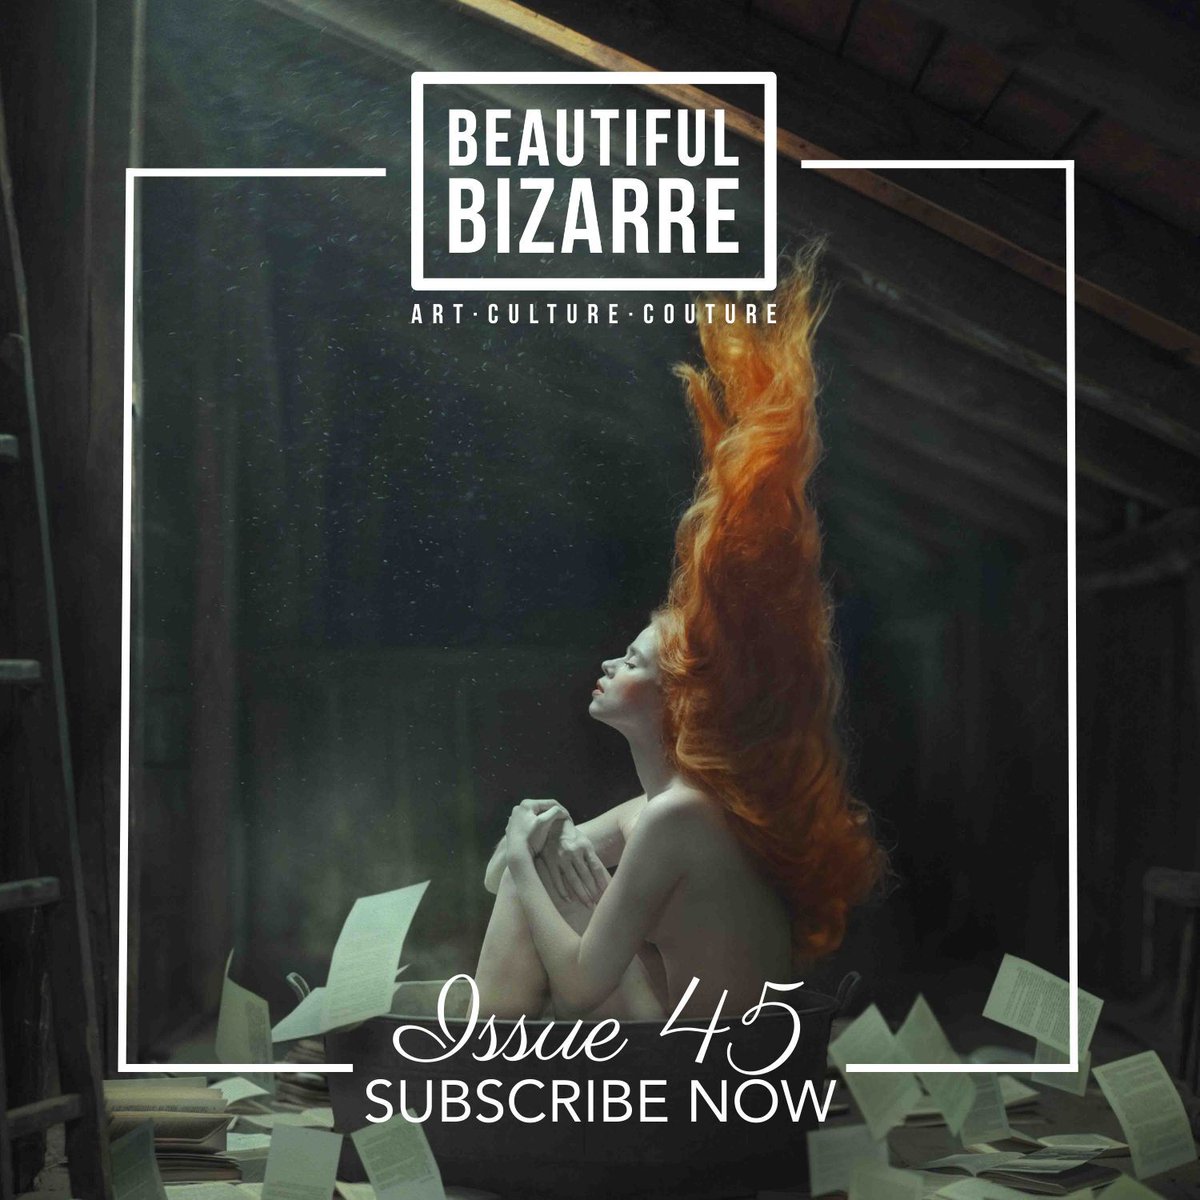 Read about Damian Drewniak and his work in the coming June issue of Beautiful Bizarre art magazine!

Never miss an issue again. Subscribe today > store.beautifulbizarre.net/product/12-mon…

#beautifulbizarre #artmagazine #artist #artinspiration #photography #fineartphotography